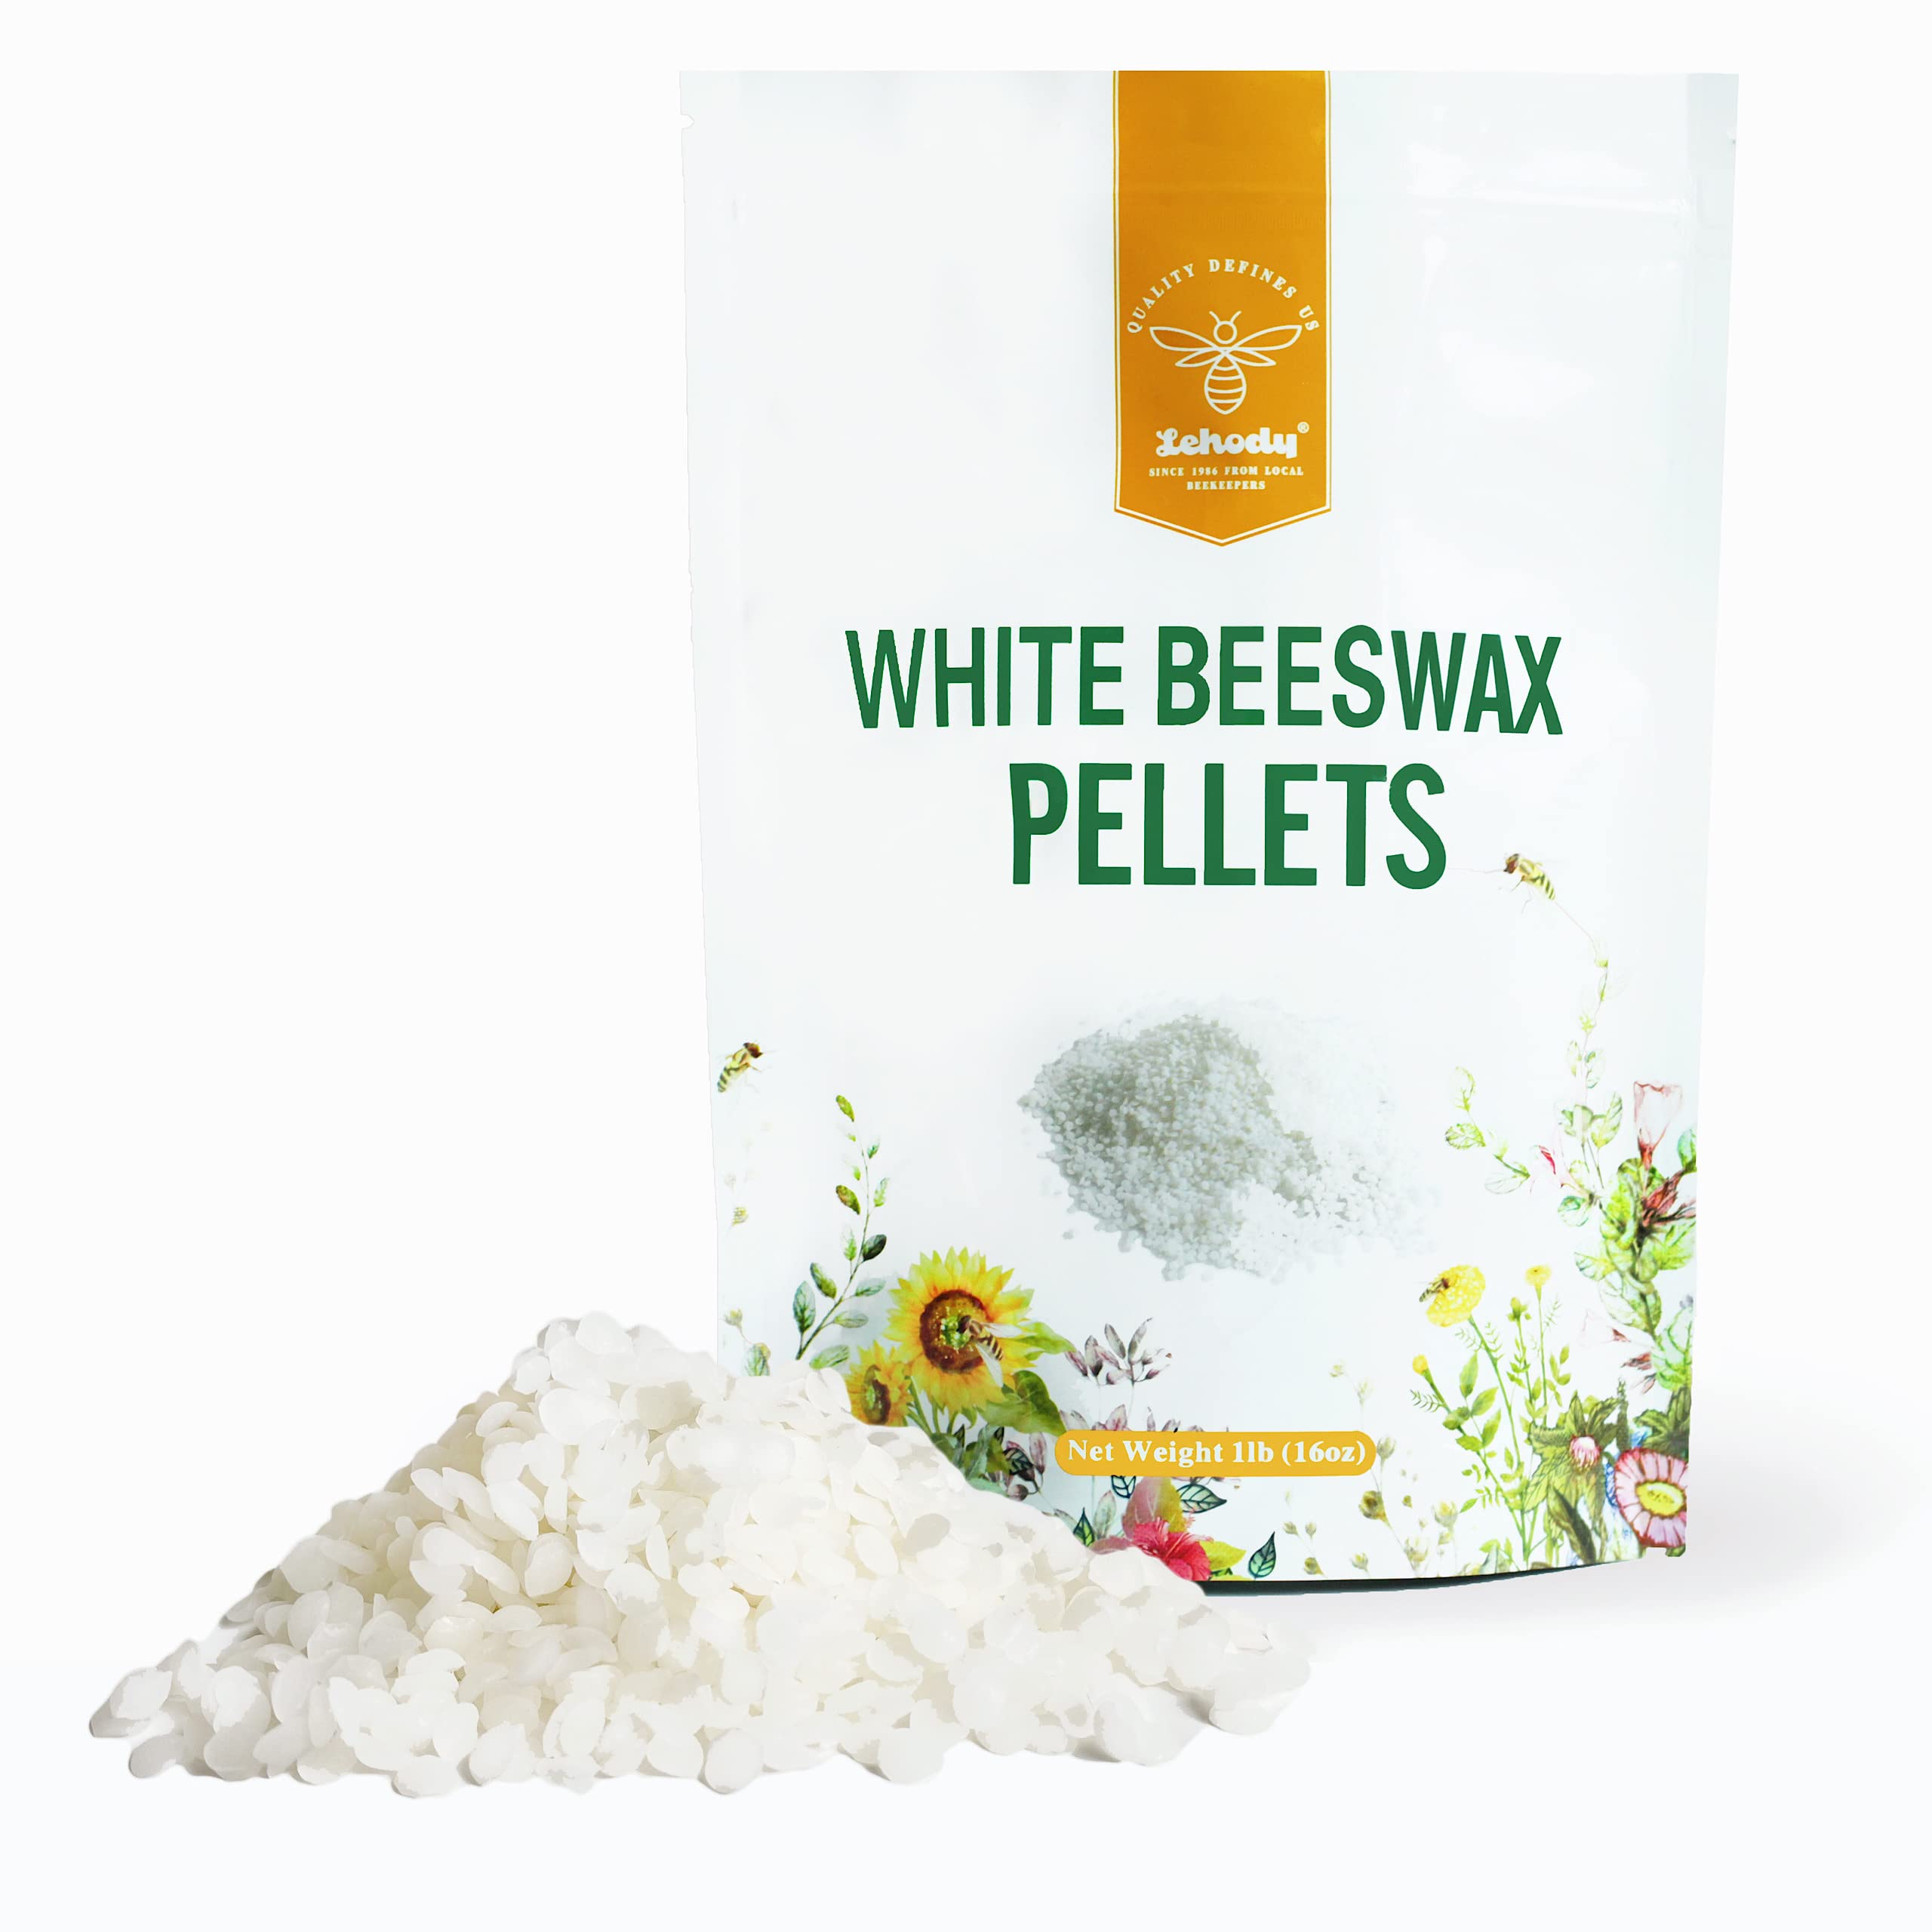 Lehody Natural White Beeswax Pellets 1lbs - Cosmetic Grade-Triple Filtered,  Ideal for Skincare, Hand Cream, Lotion